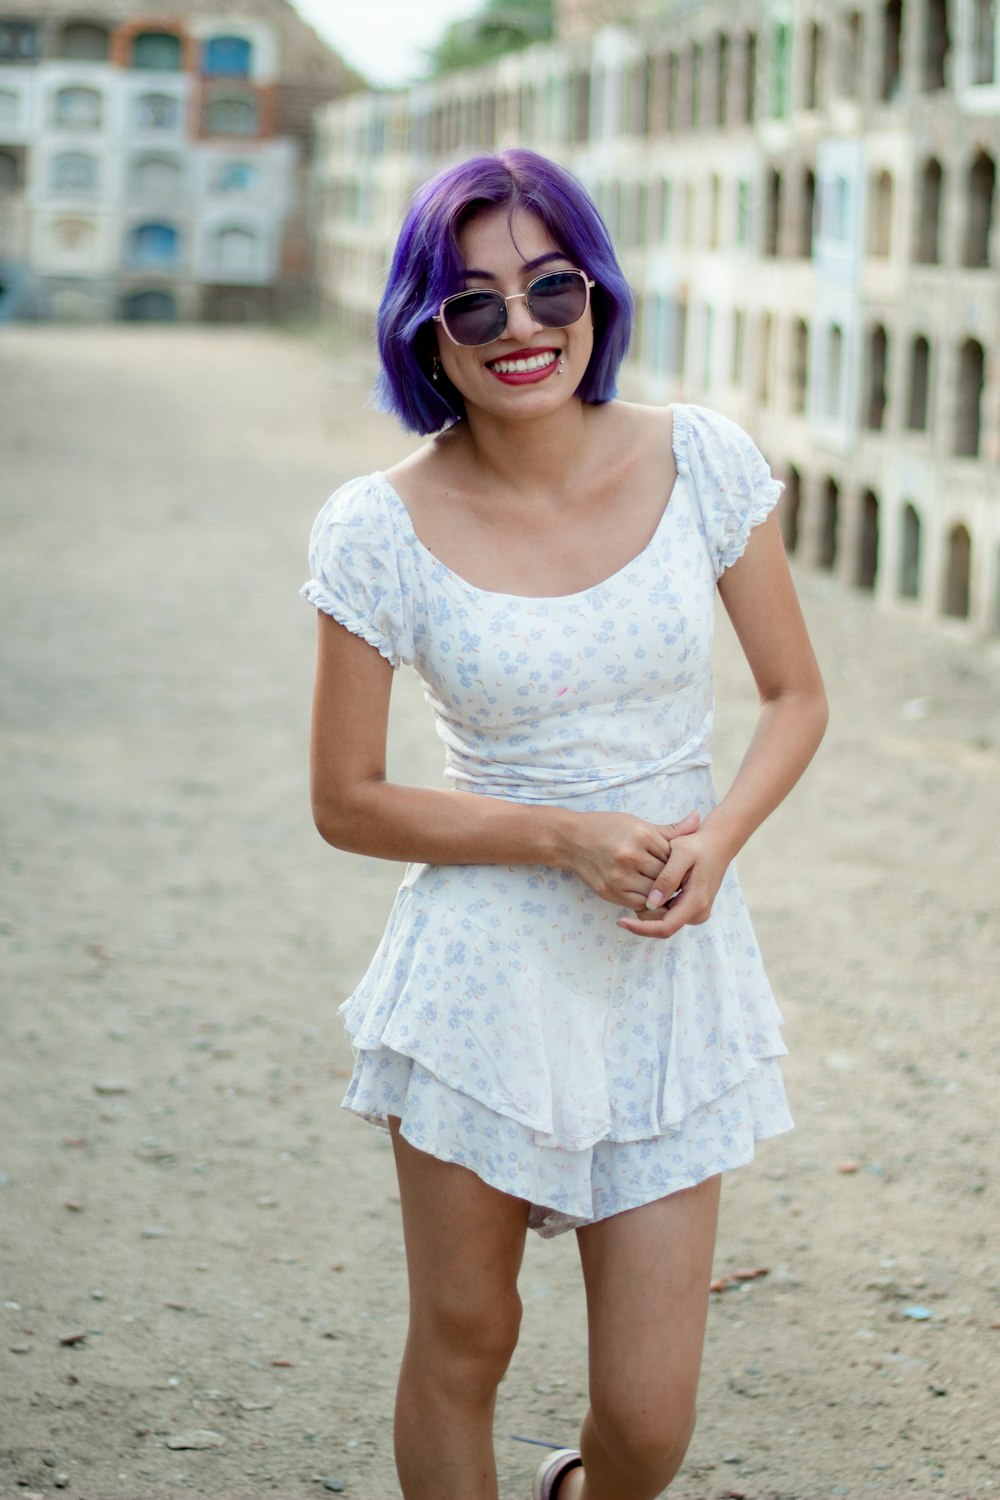 a woman with purple hair wearing a white dress